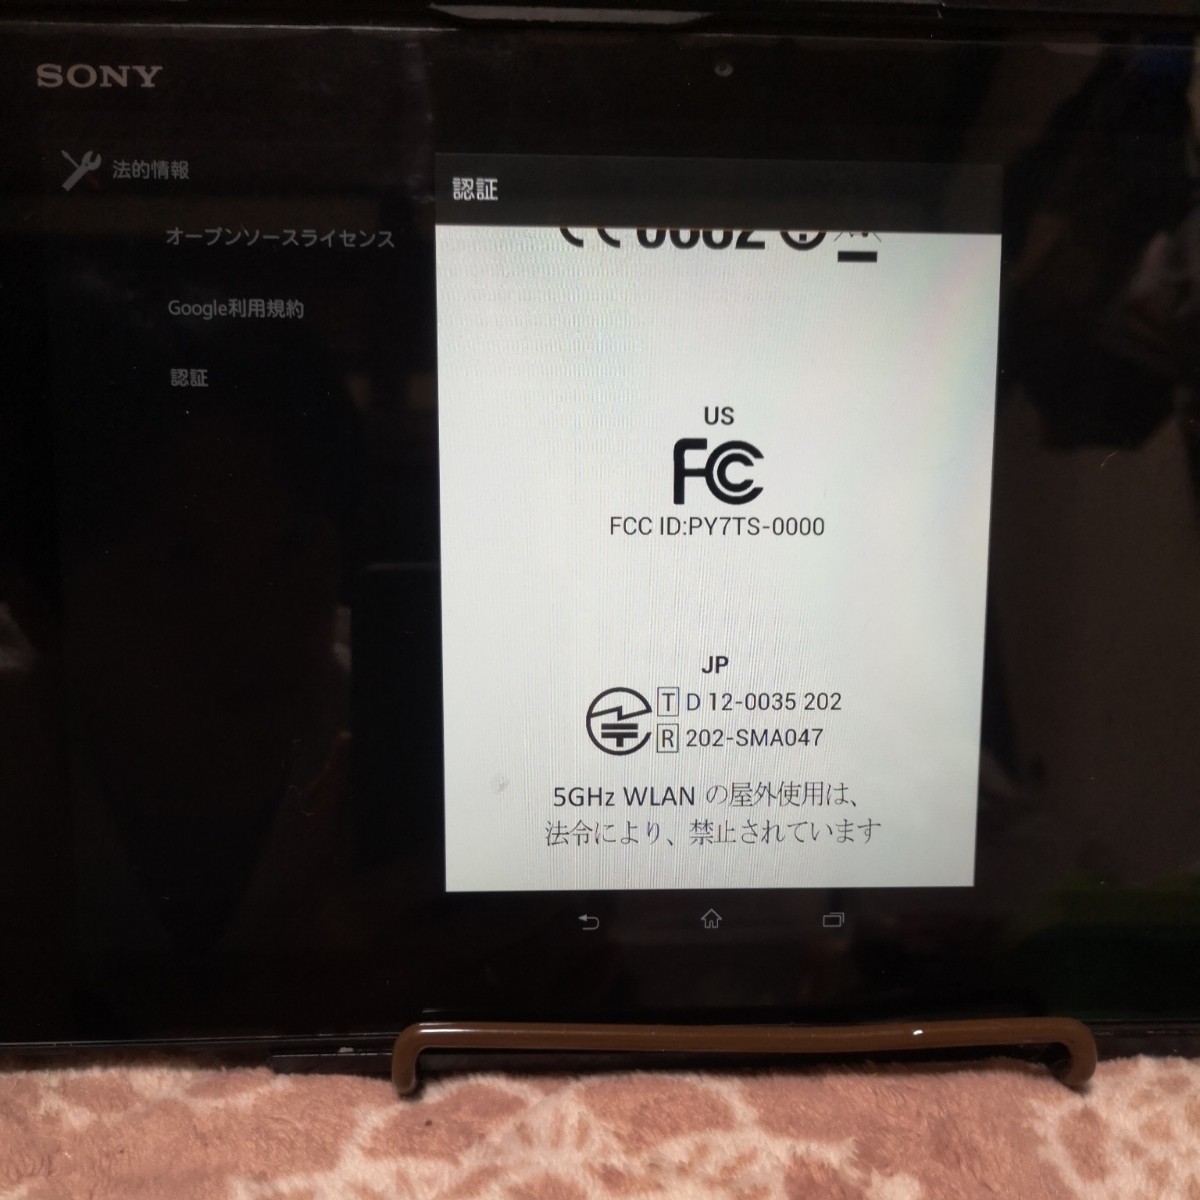 SONY XPERIA ZSGP312 10インチ　タブレット Wi-Fi